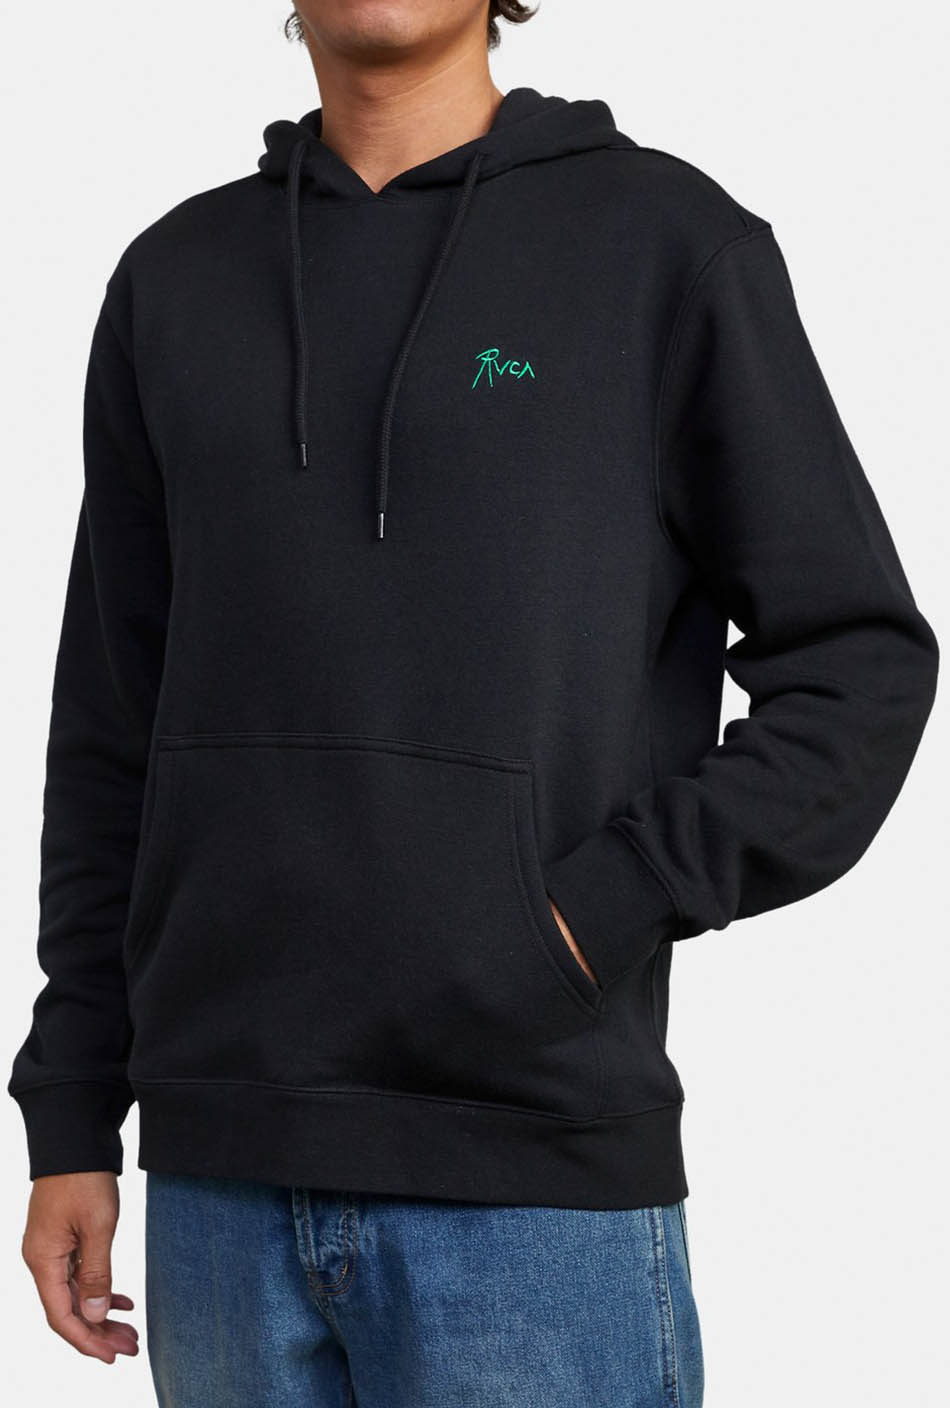 RVCA The Gorgeous Hussy black hoodie